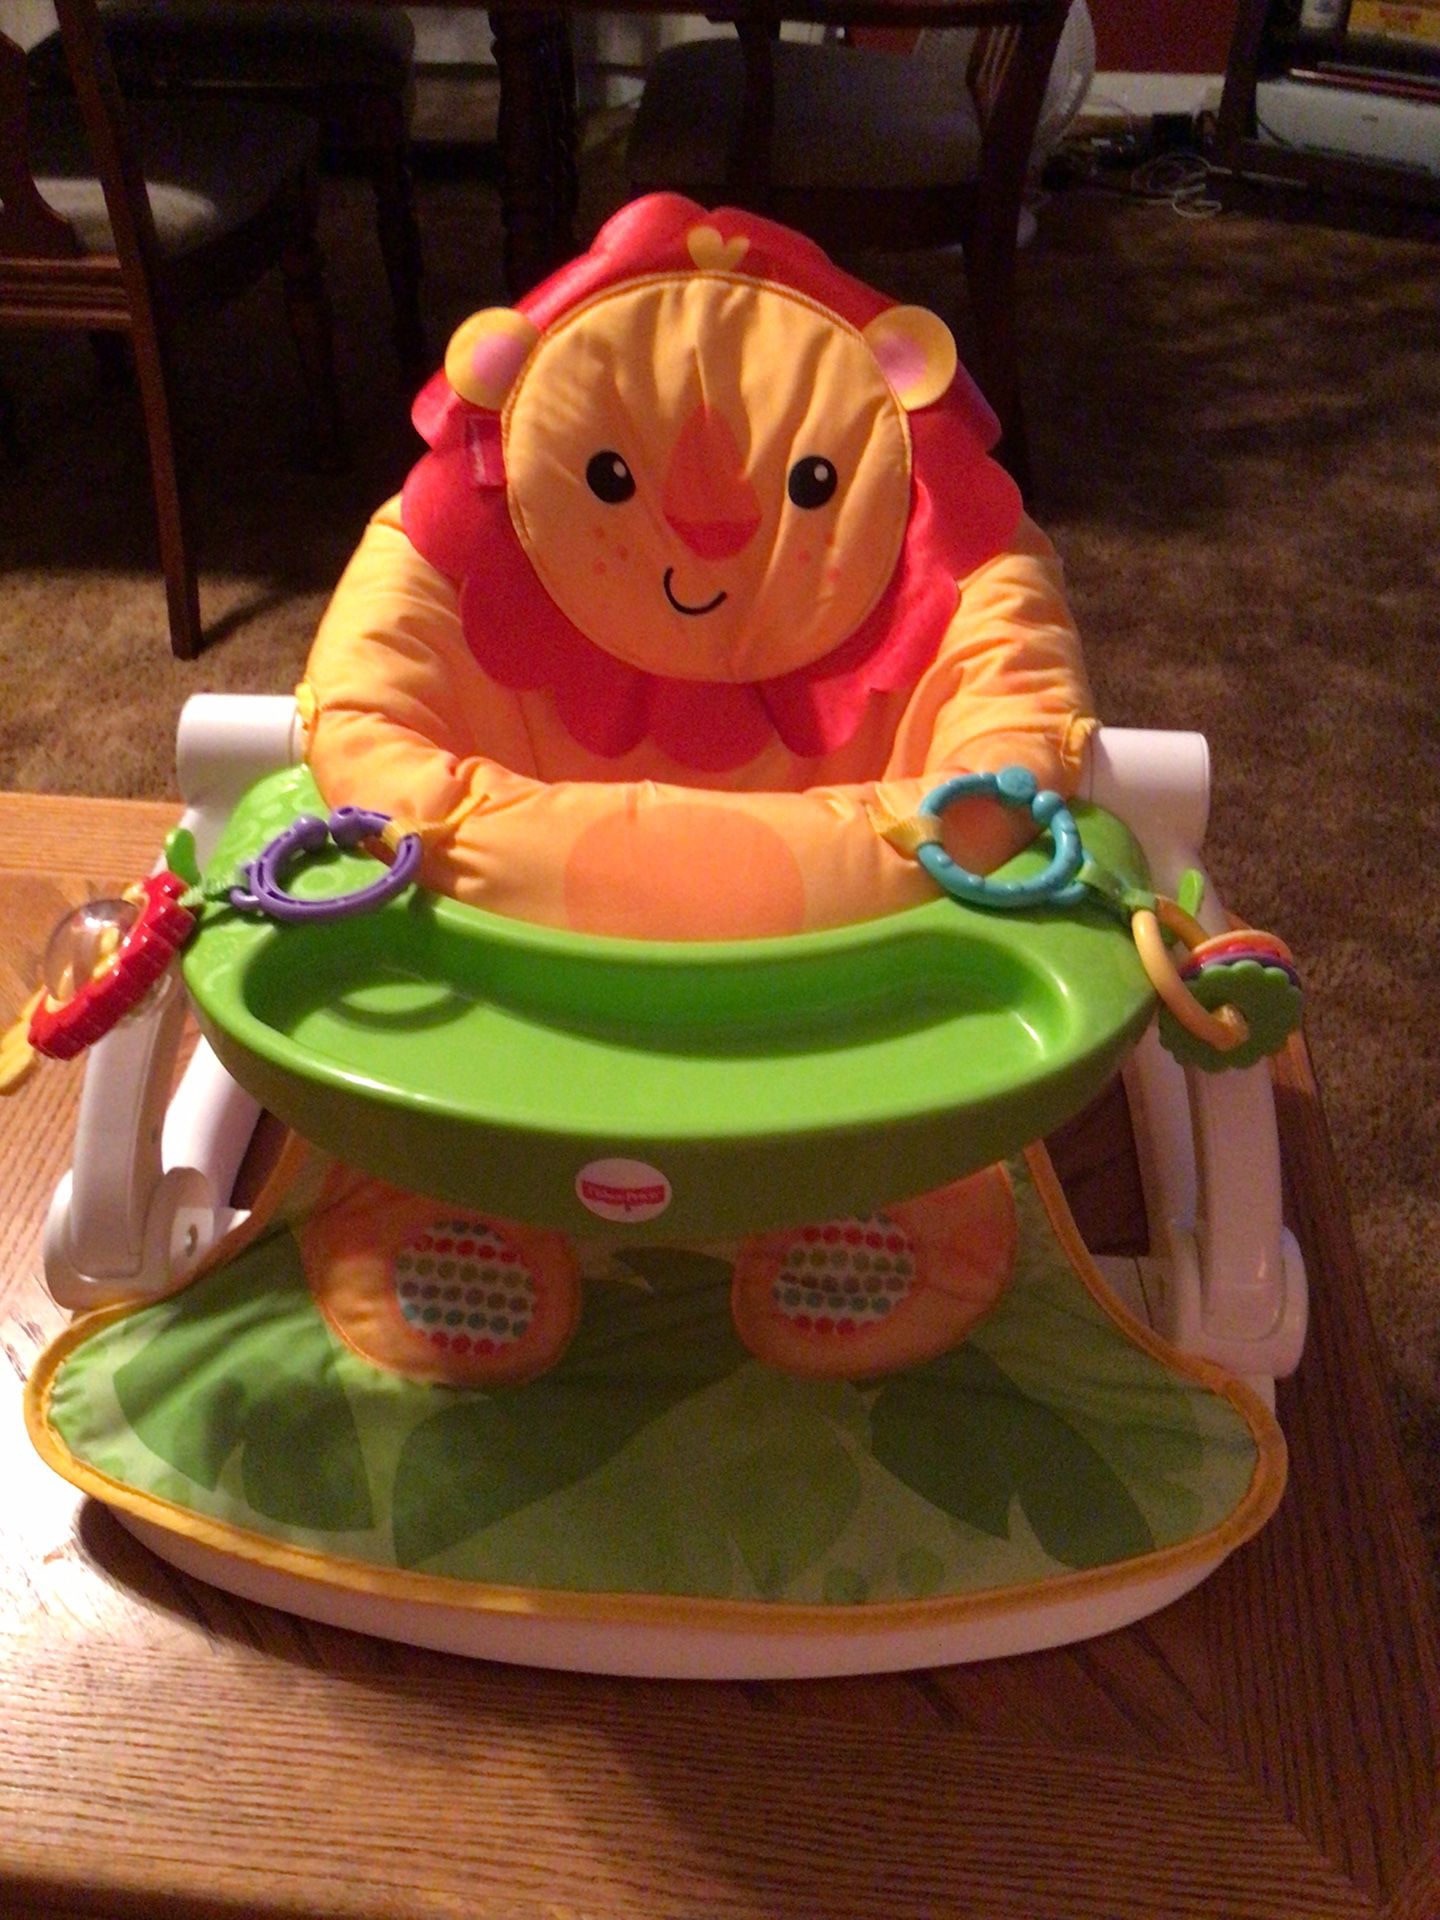 Fisher-Price Sit-Me-Up Lion Floor Seat with Removable Tray